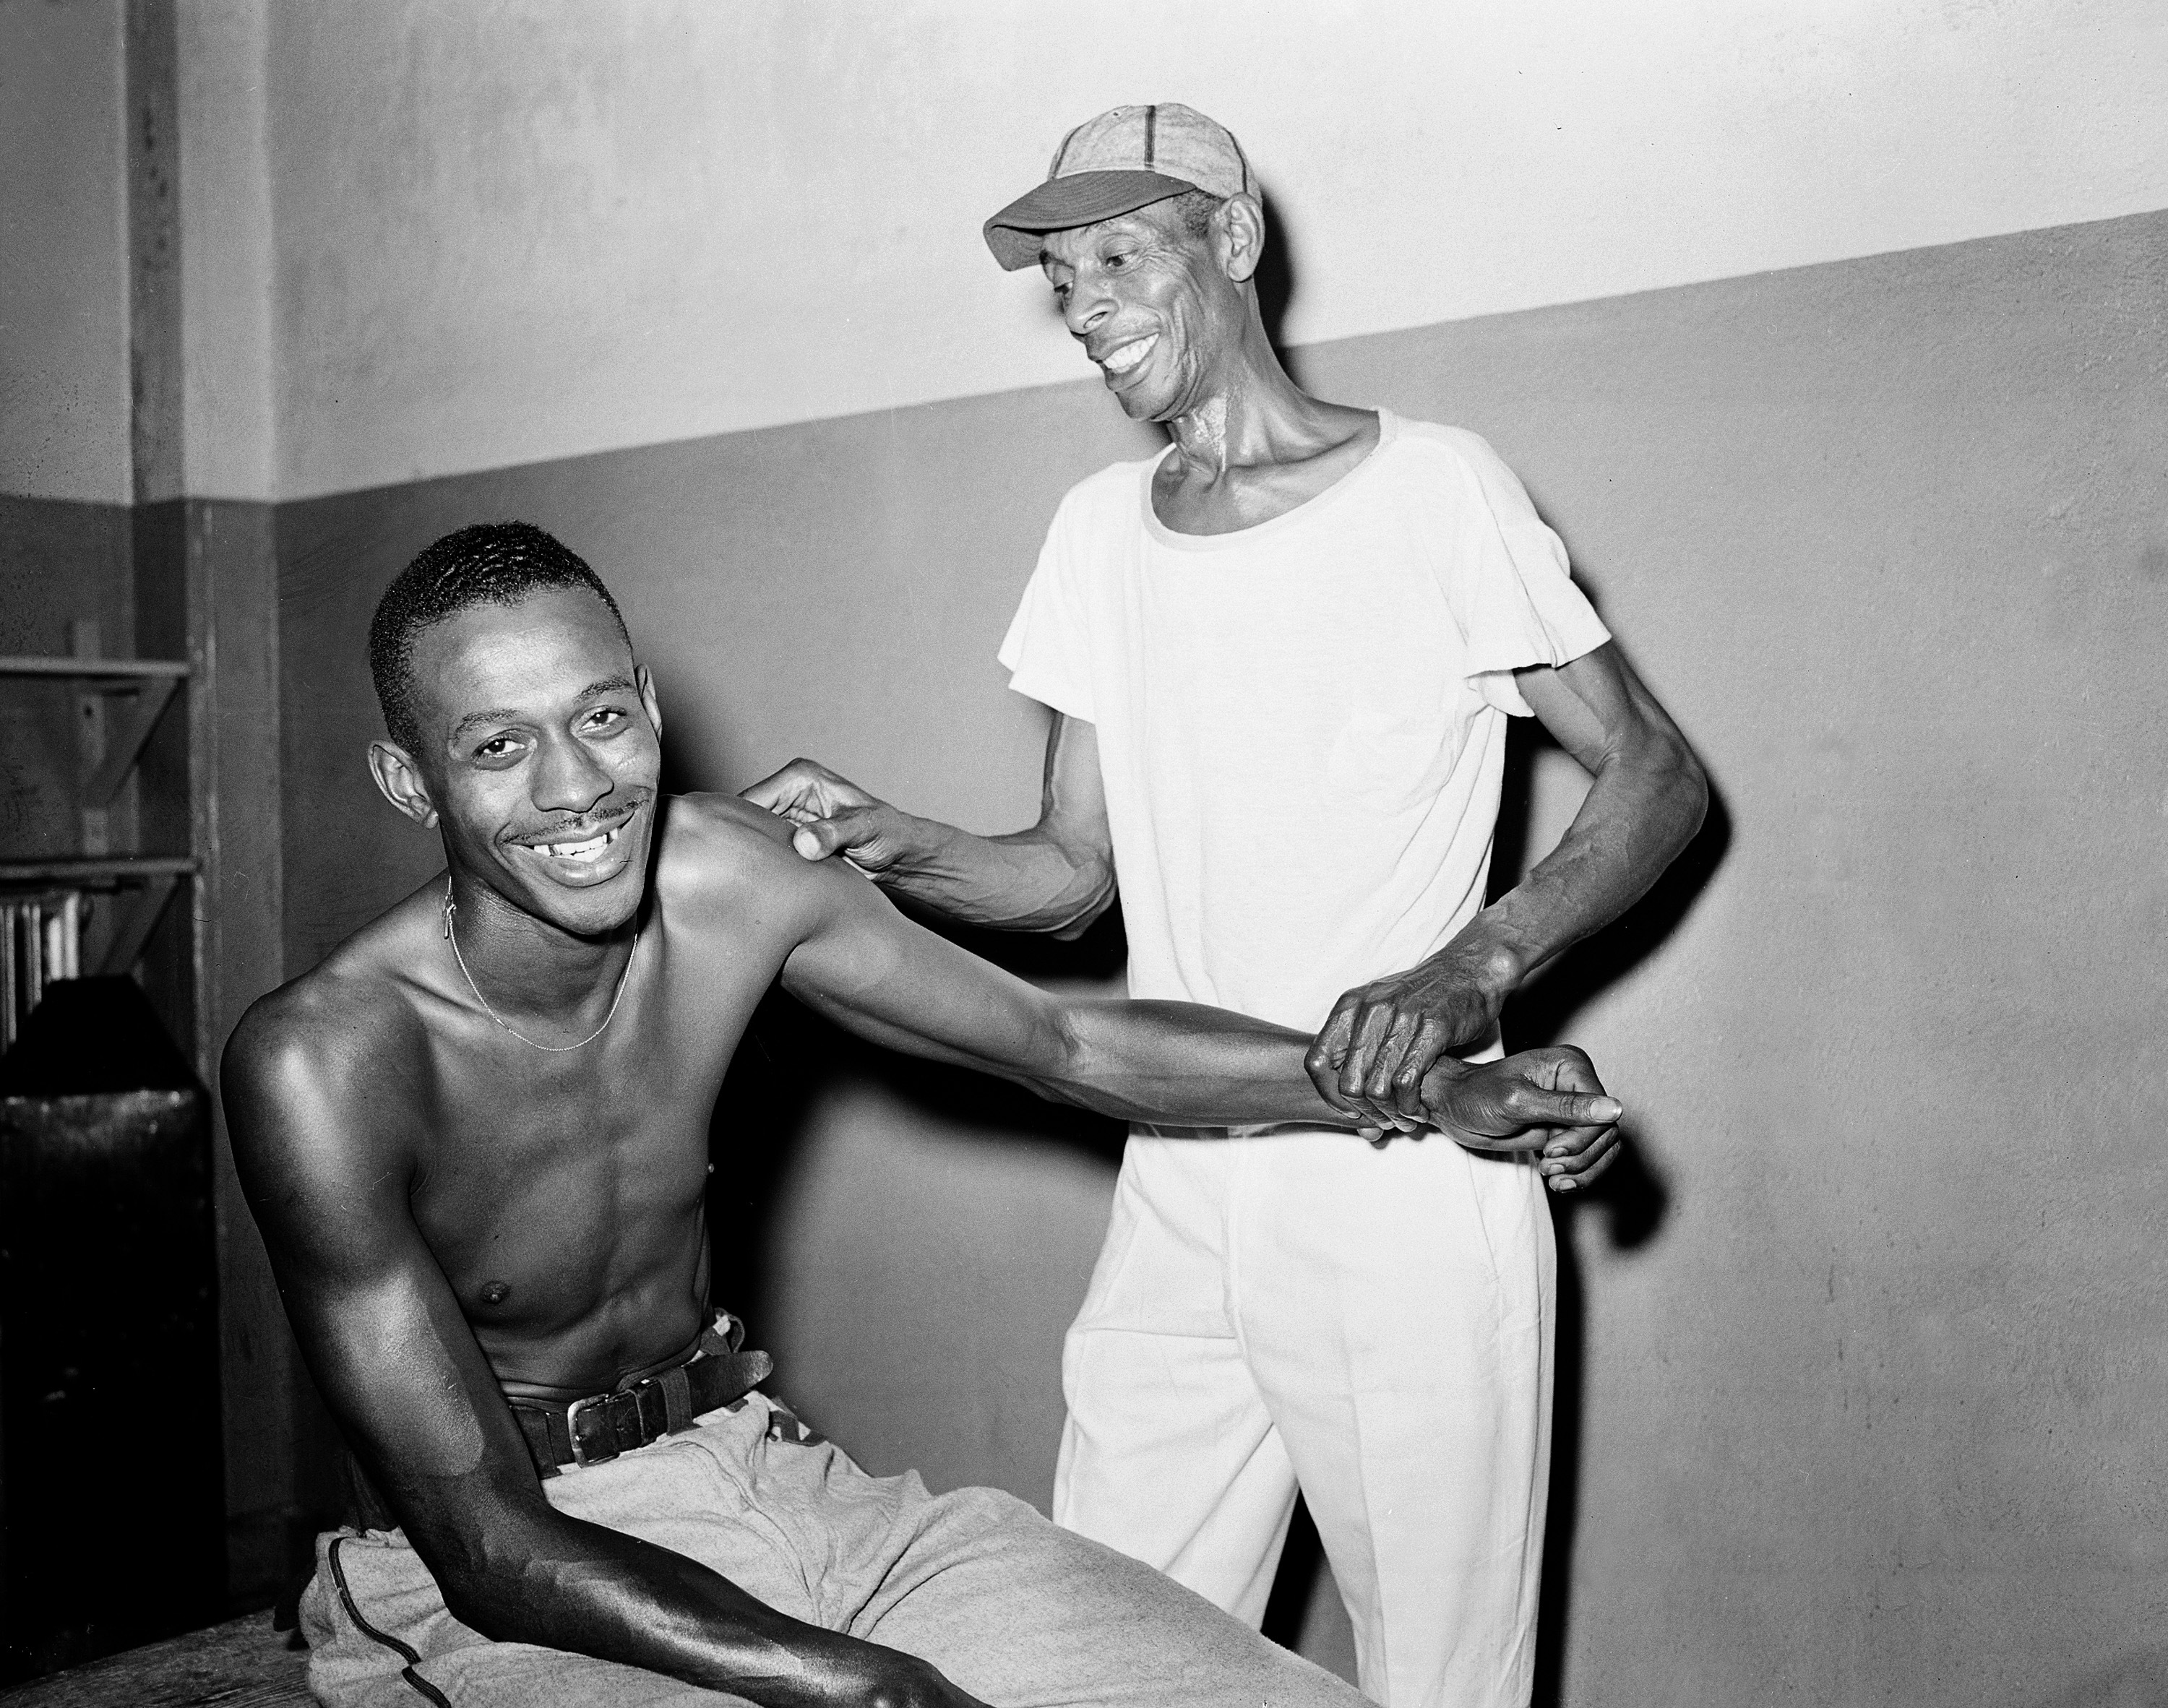 Satchel Paige, right-handed pitcher for the Kansas City Monarchs of the Negro American League (NAL), has his pitching arm massaged by team trainer Frank J. Floyd in New York on Aug. 2, 1942.